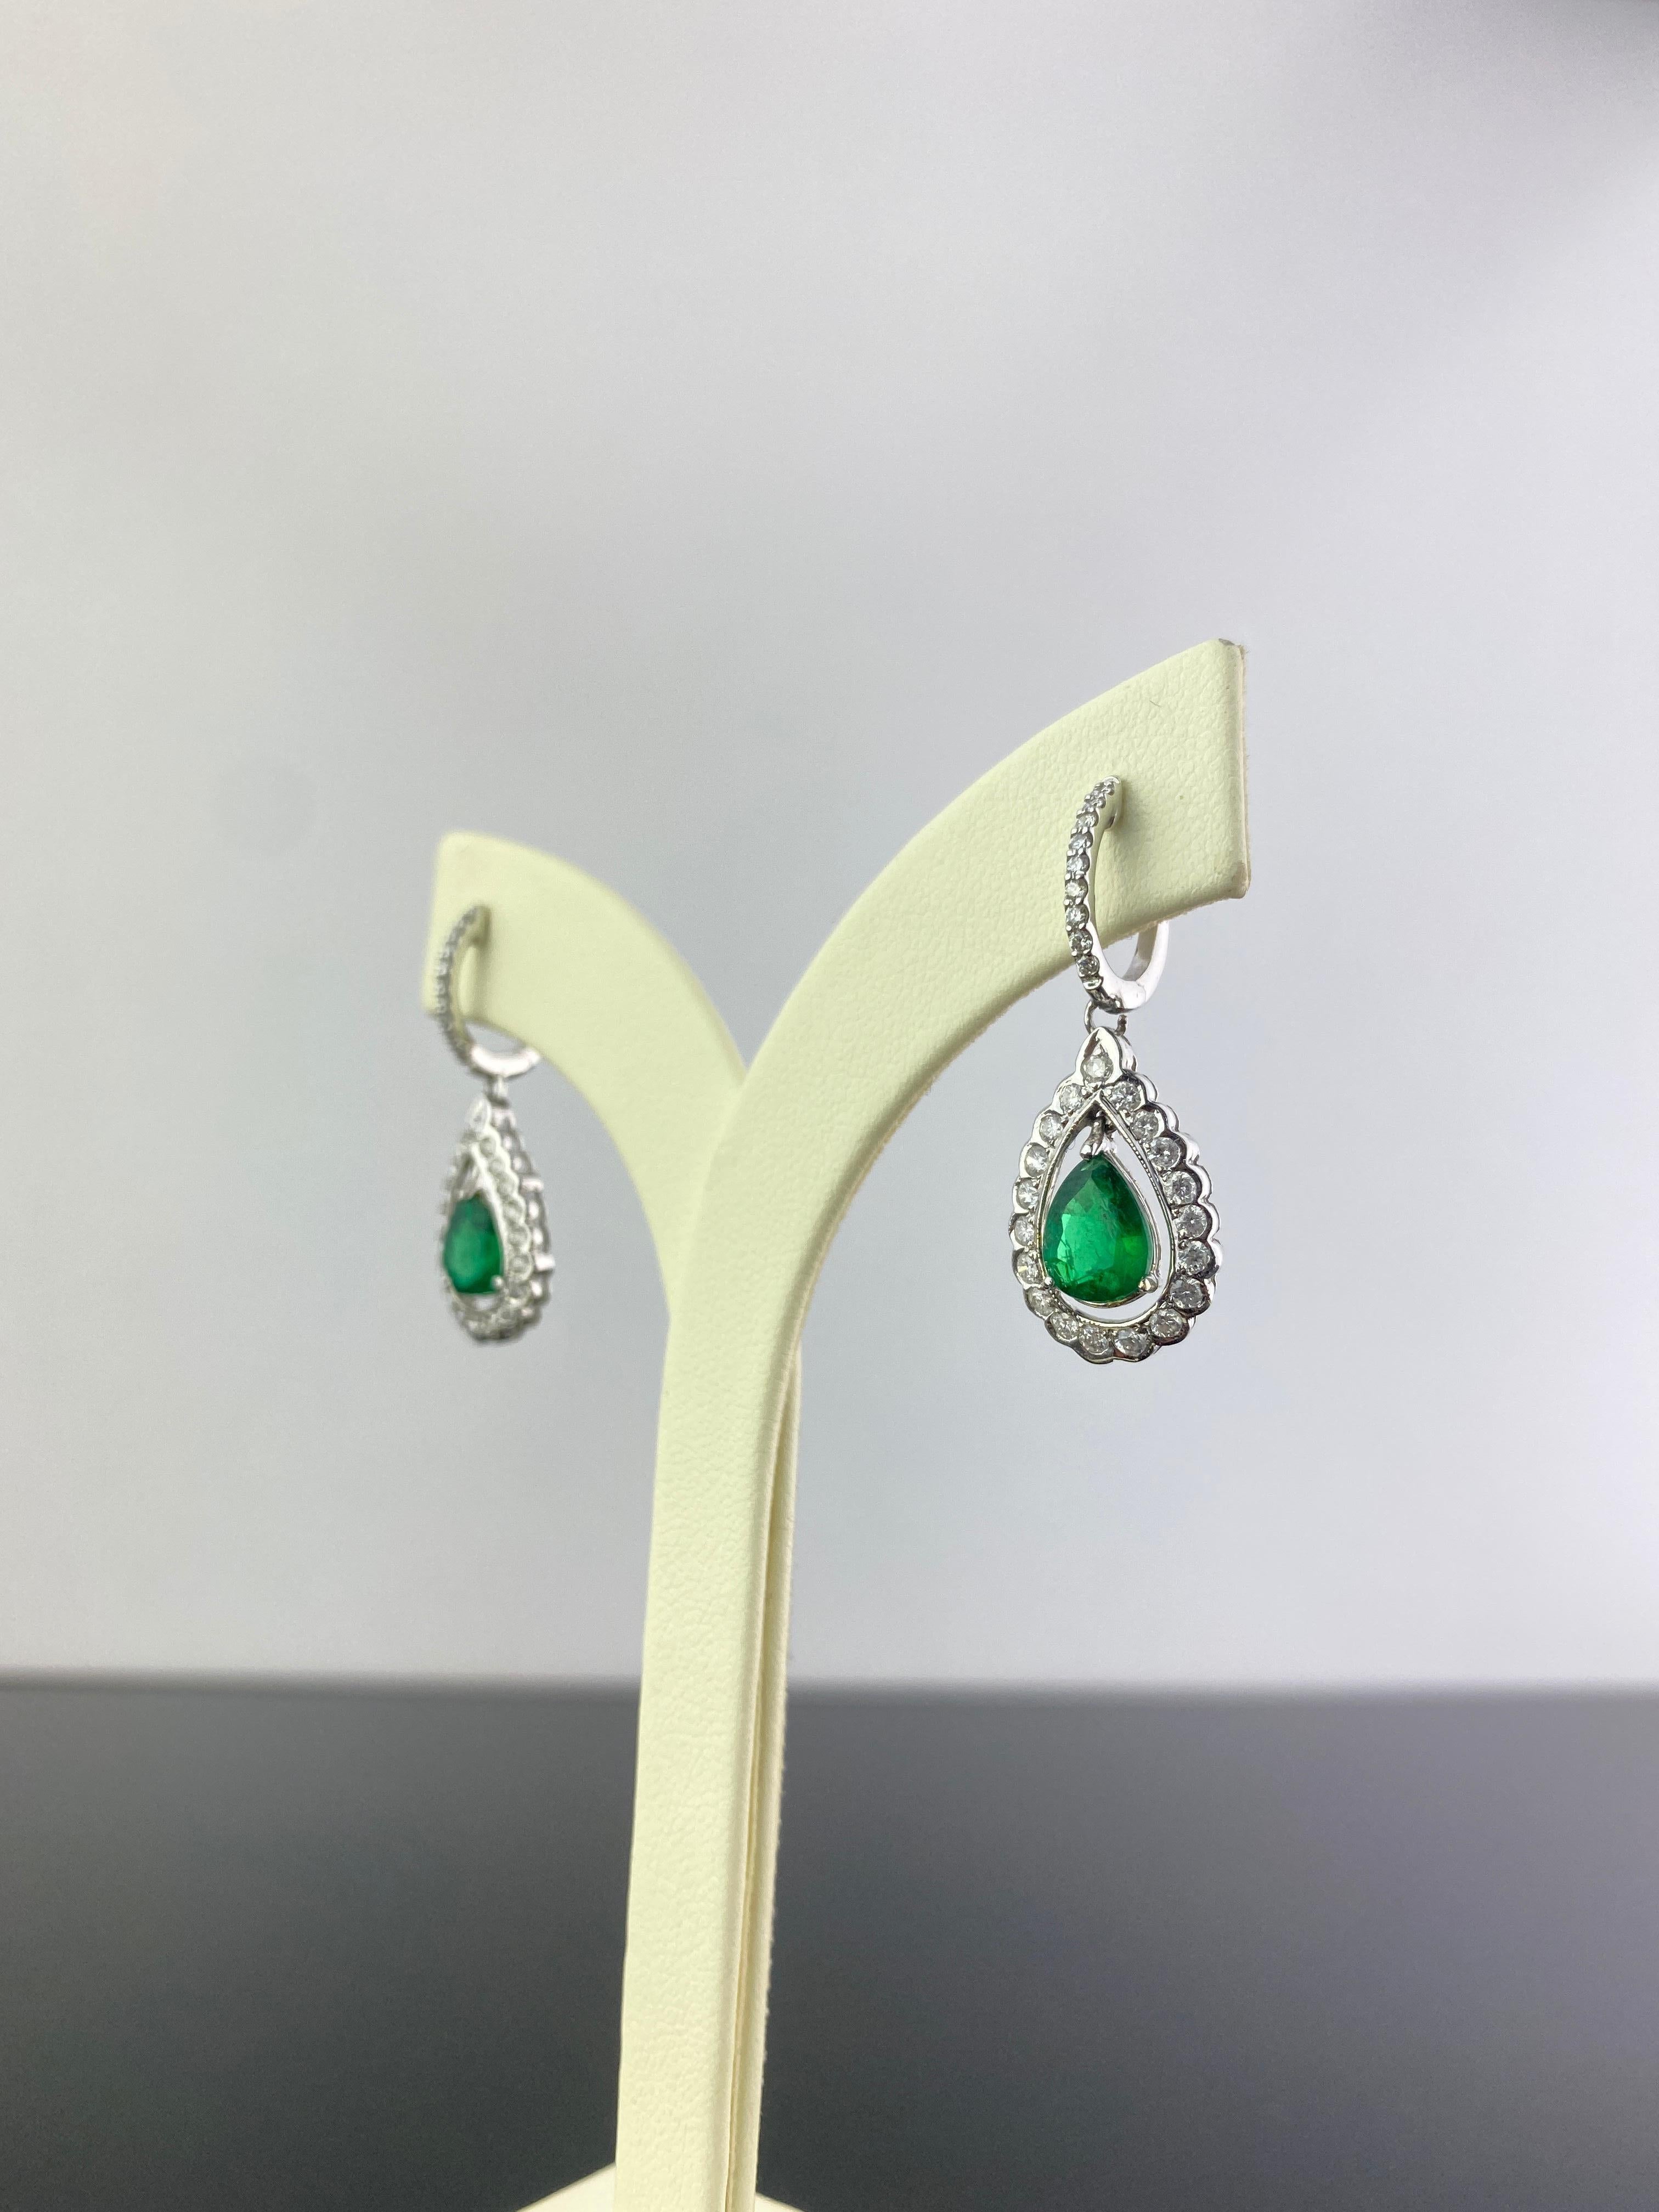 2.14 Carat Pear Shape Emerald and Diamond Dangling Earring For Sale 1